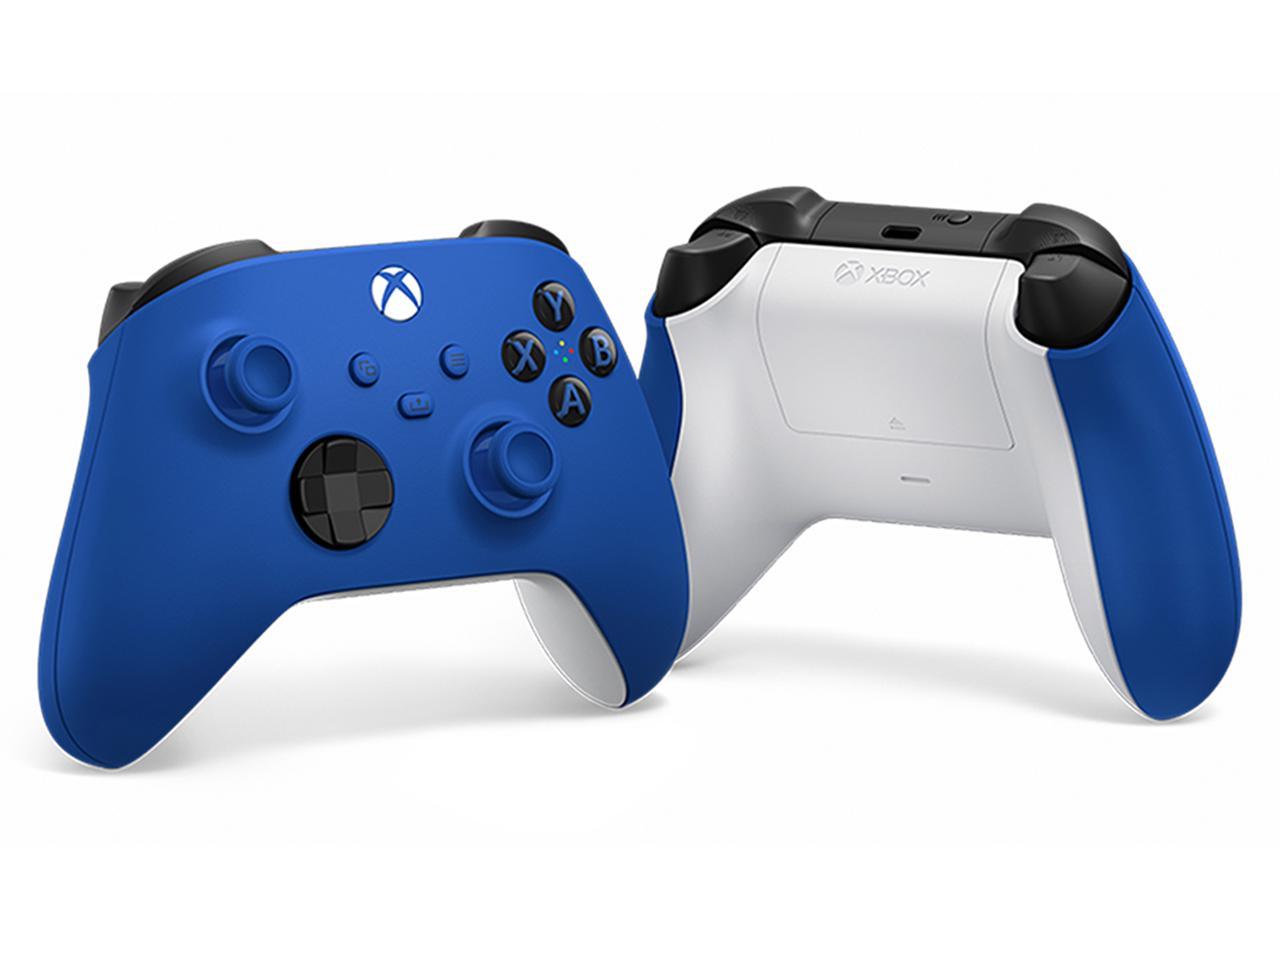 Xbox Wireless Controller - Shock Blue - image 4 of 6